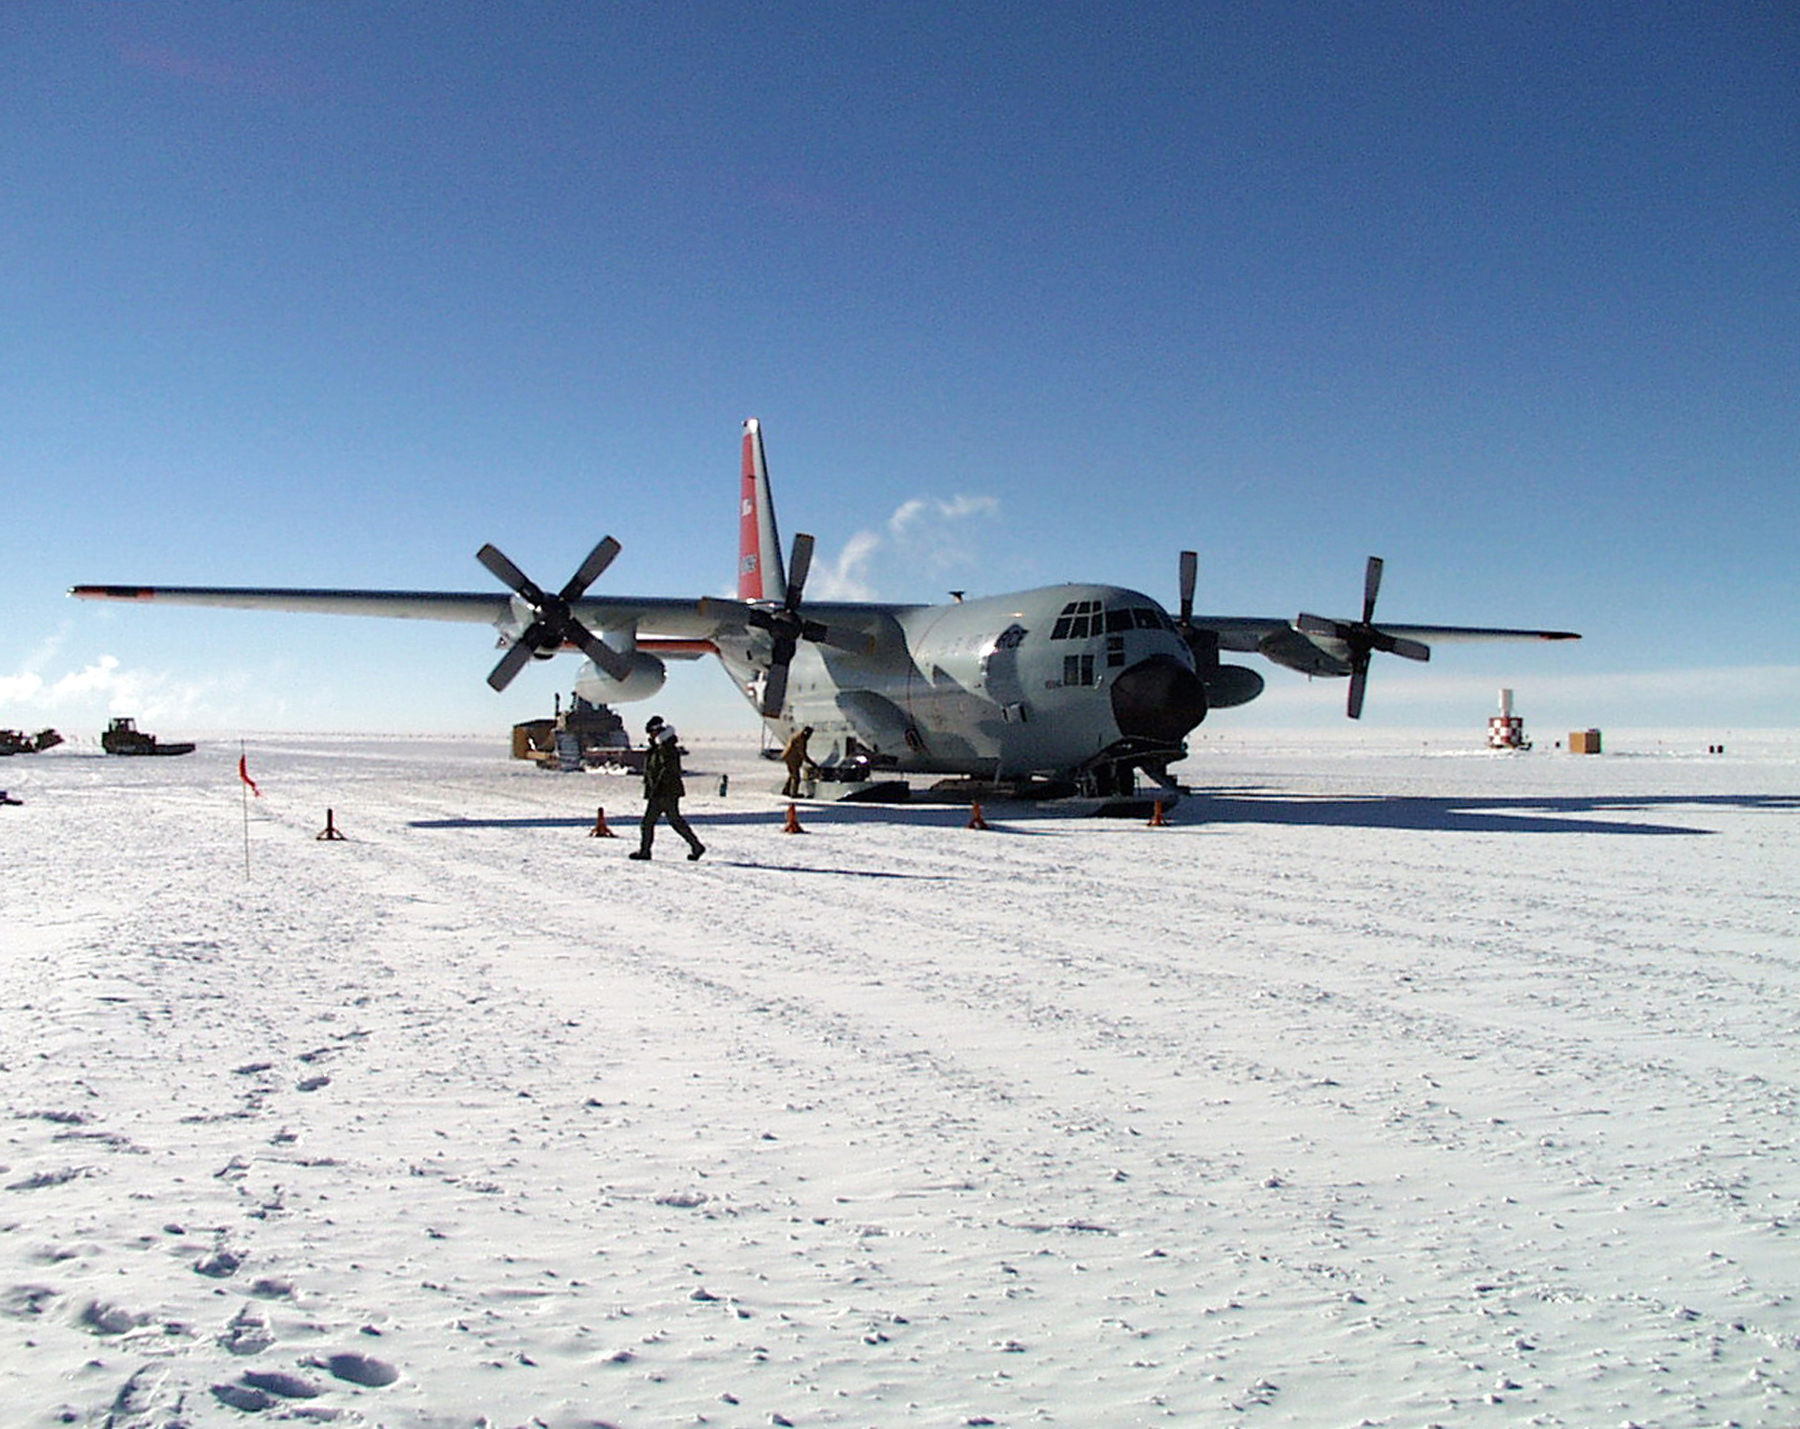 A ski-equipped propellered airplane sits on a snow-covered tarmac.